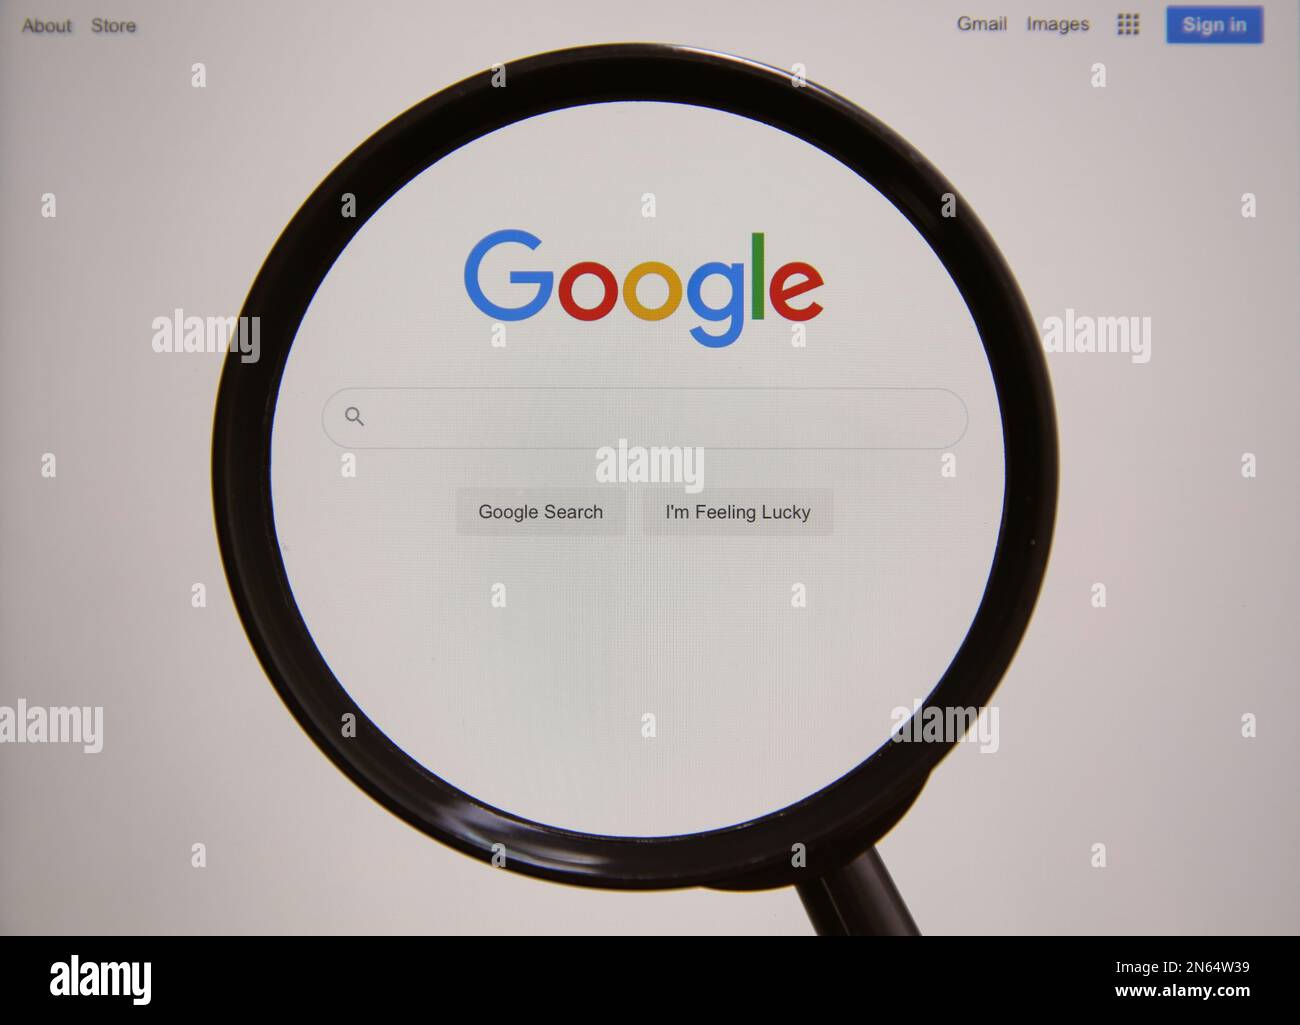 where to find magnifying glass｜TikTok Search